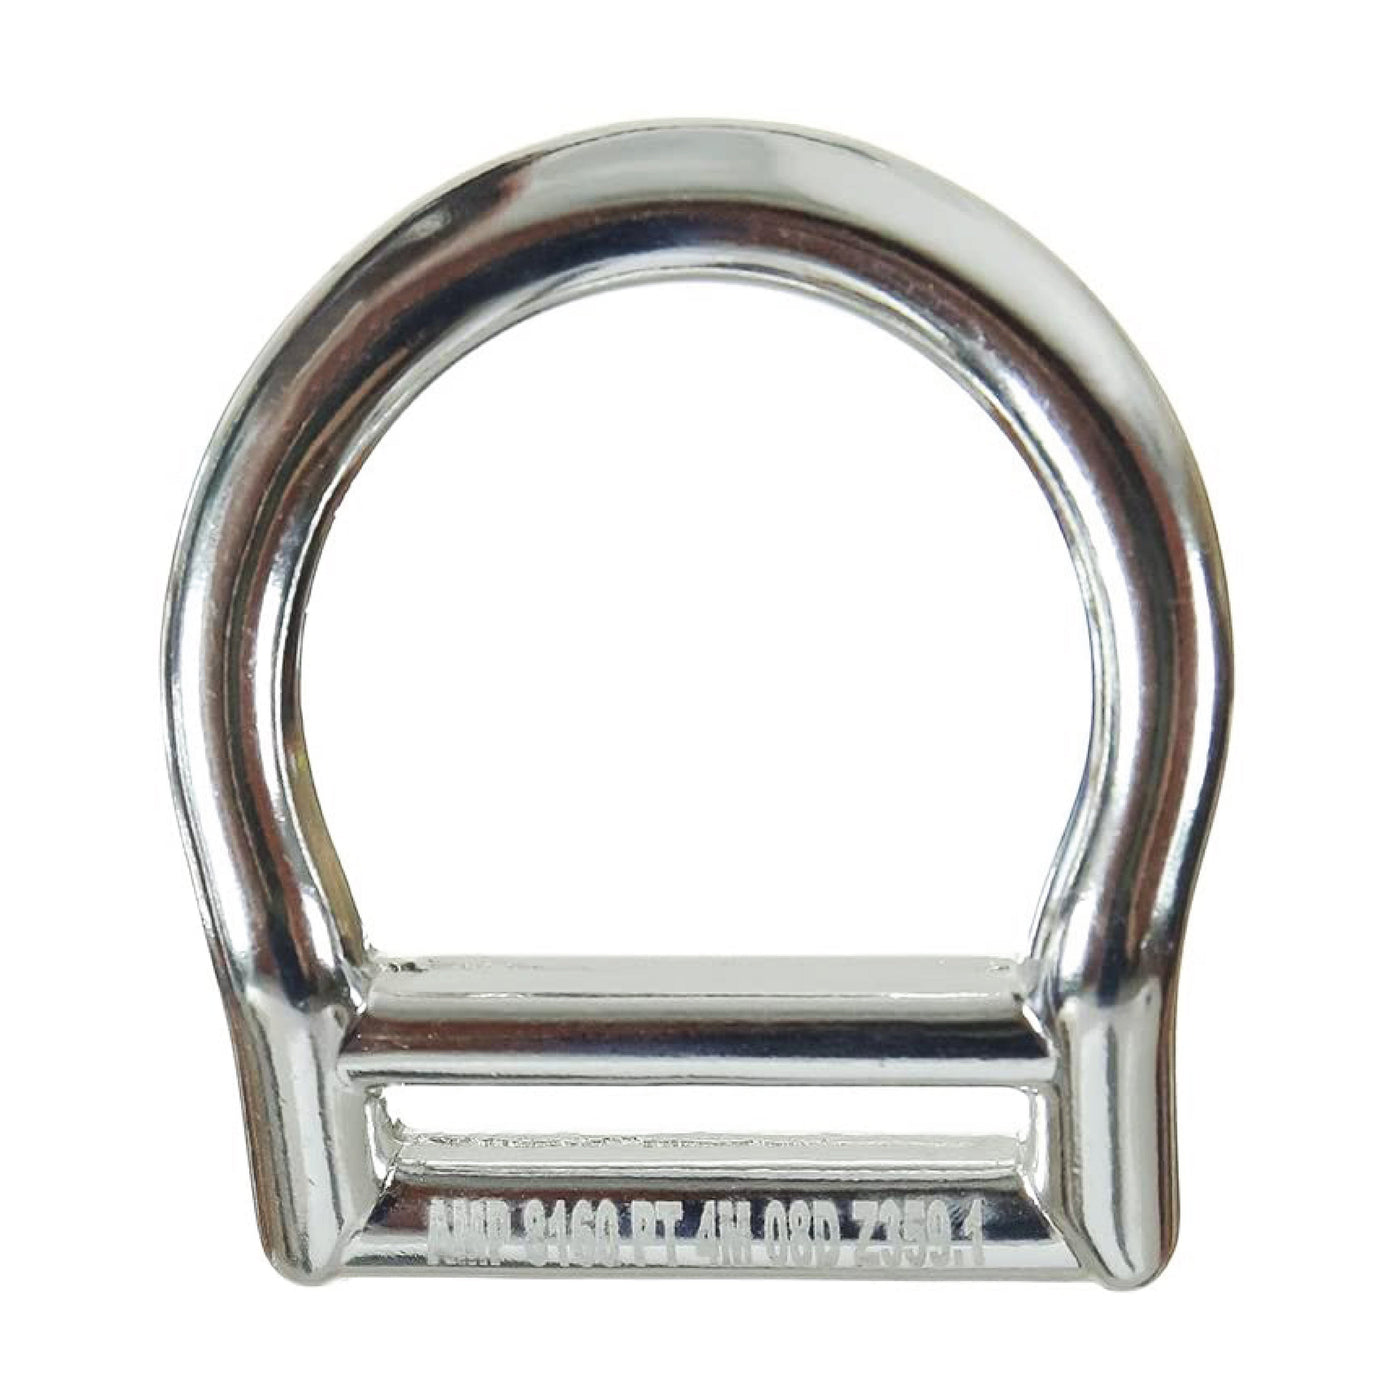 Bent Aluminum Slotted D-Ring for 1 3/4" Webbing Silver - Fusion Climb